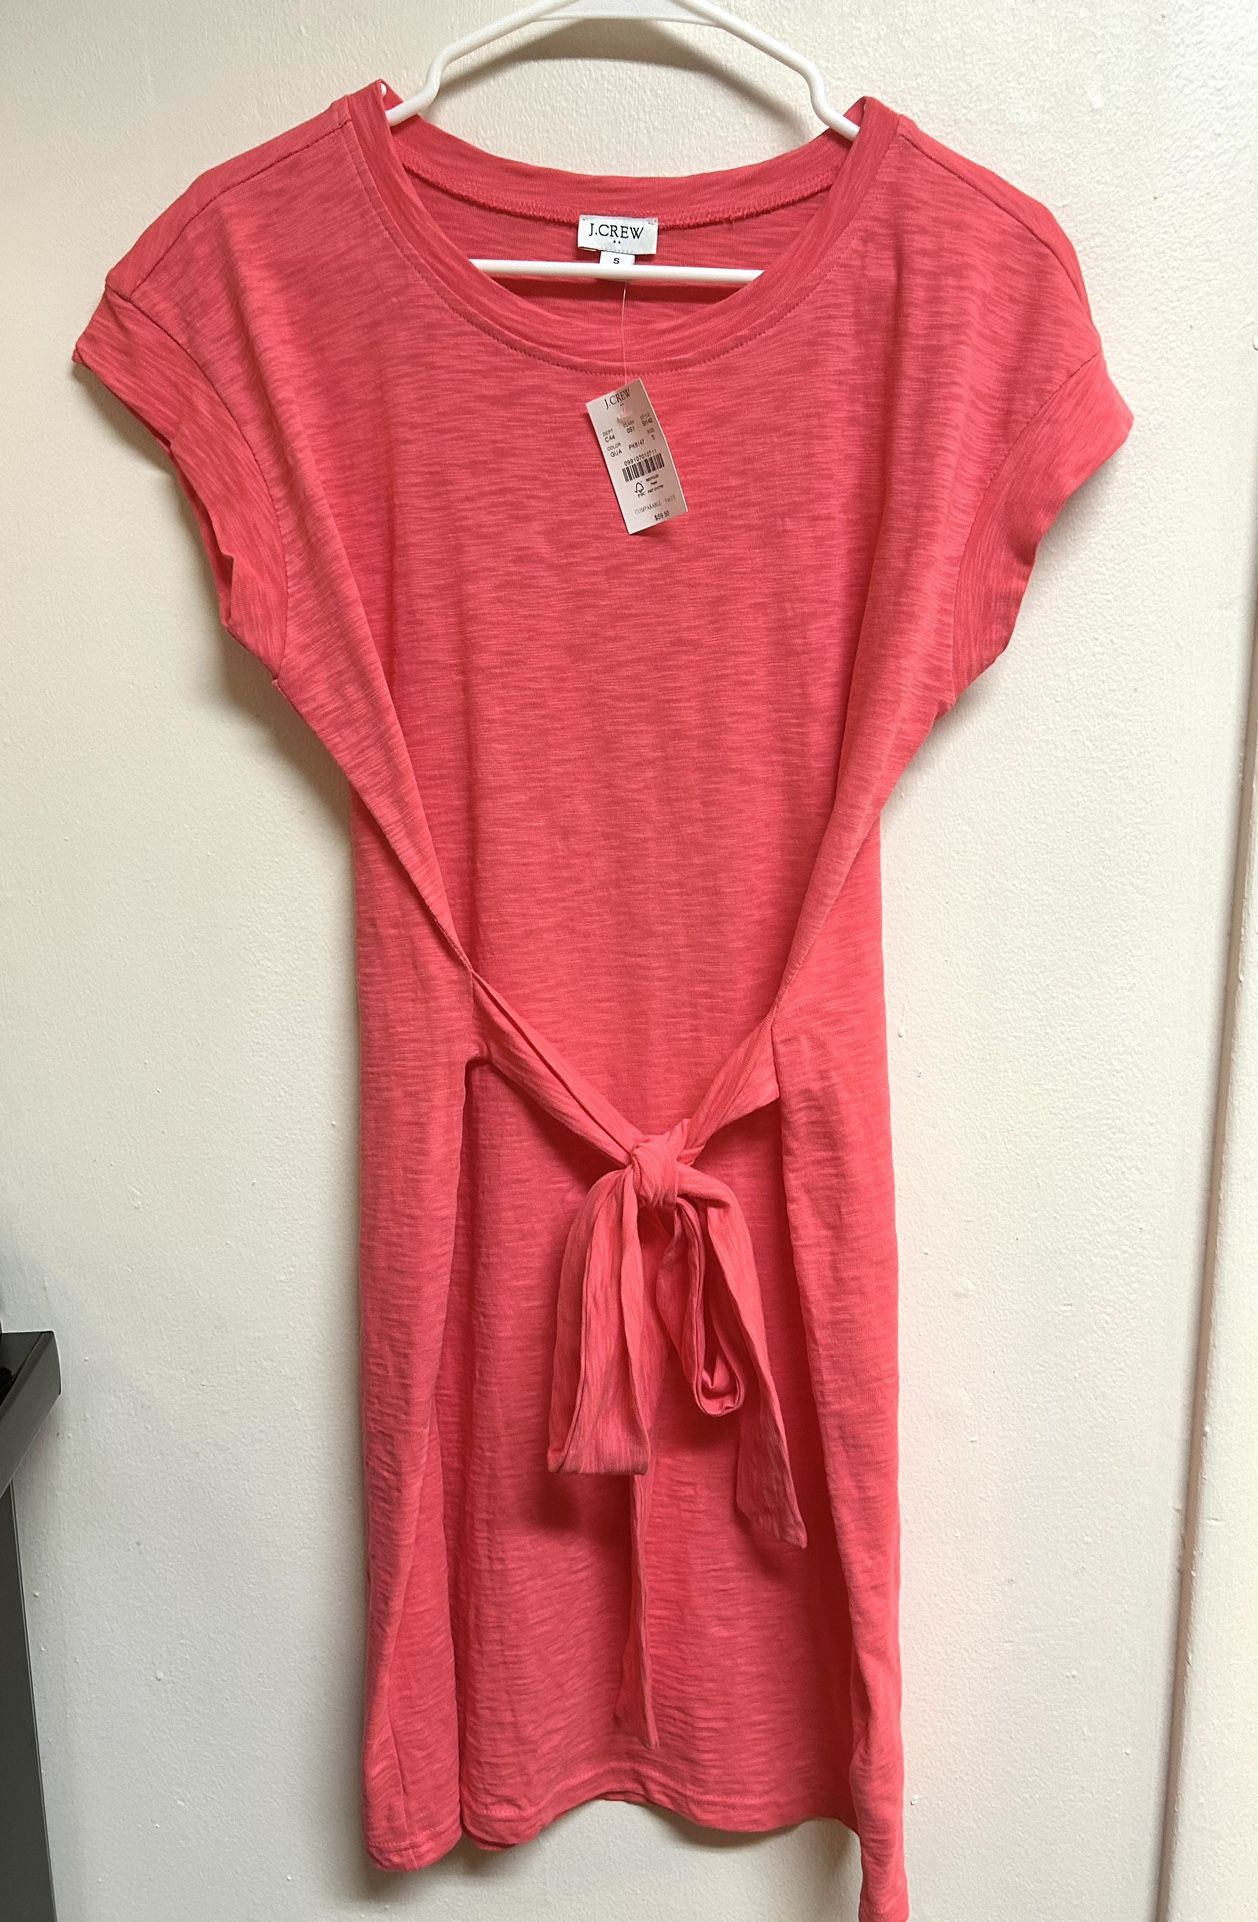 J.Crew- NWT 100% Cotton Coral Pink T-Shirt Dress Tie Front Size Small